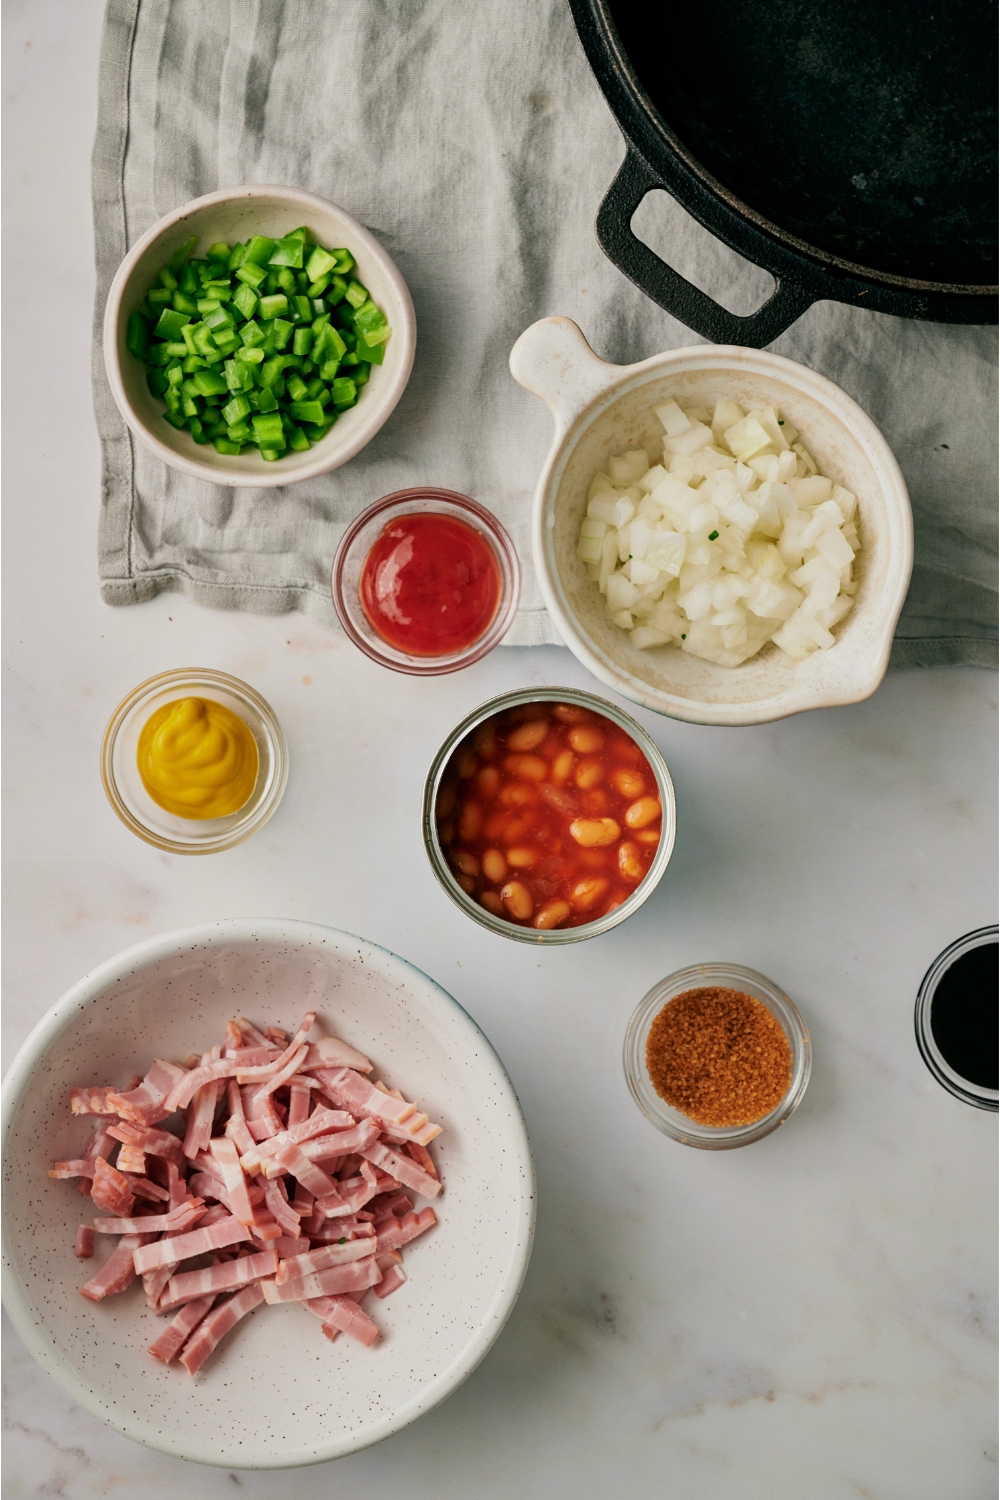 An assortment of ingredients including bowls of raw bacon, ketchup, brown sugar, diced onion, diced green bell pepper, yellow mustard, and an open can of baked beans.